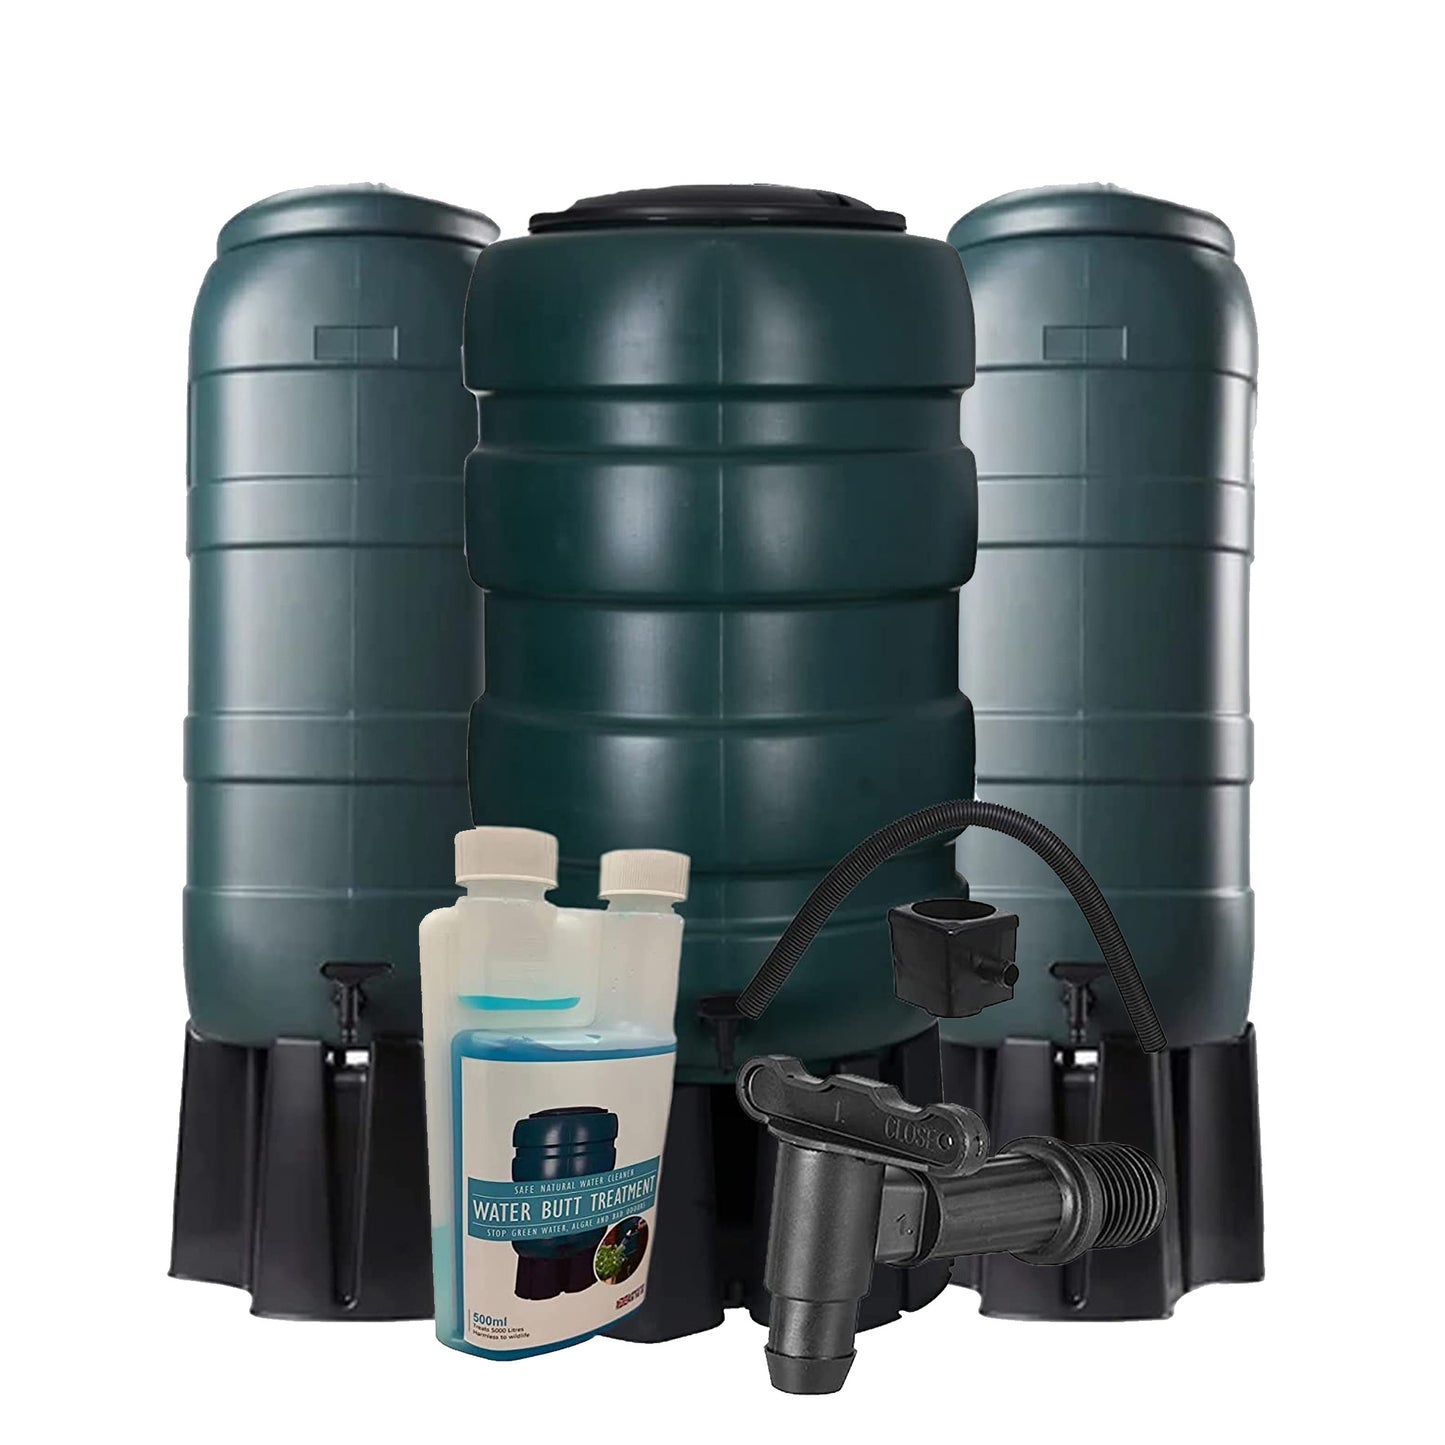 Selection Of Green Water Butts Rain Collectors Complete With Stand Kit & Treatment Cleaner